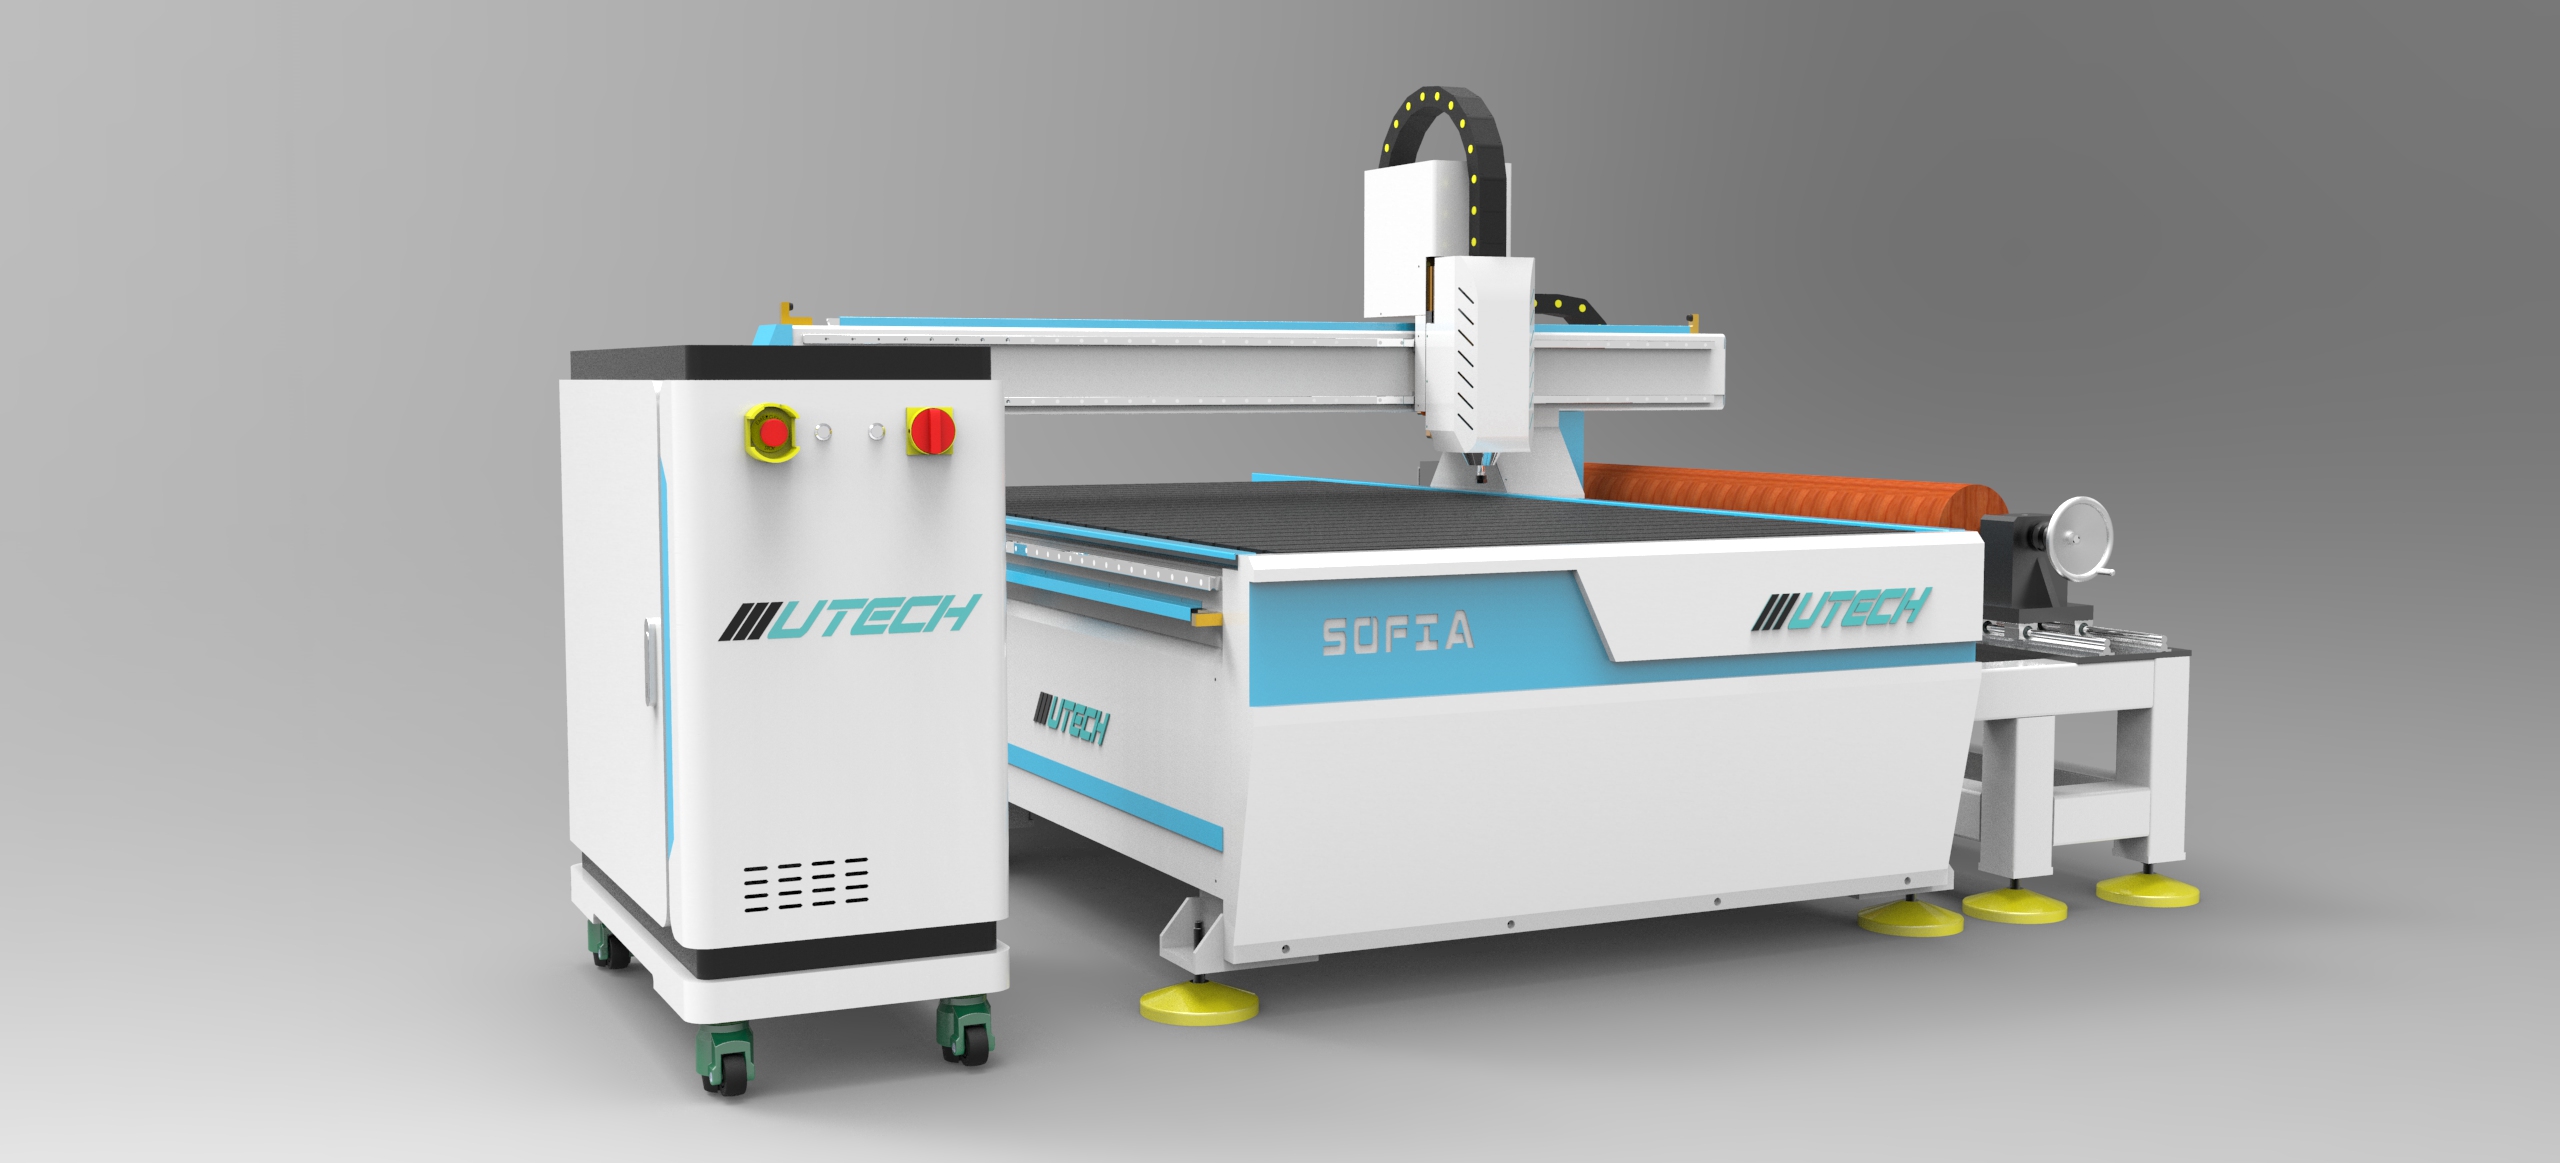 rotary axis cnc carving machine